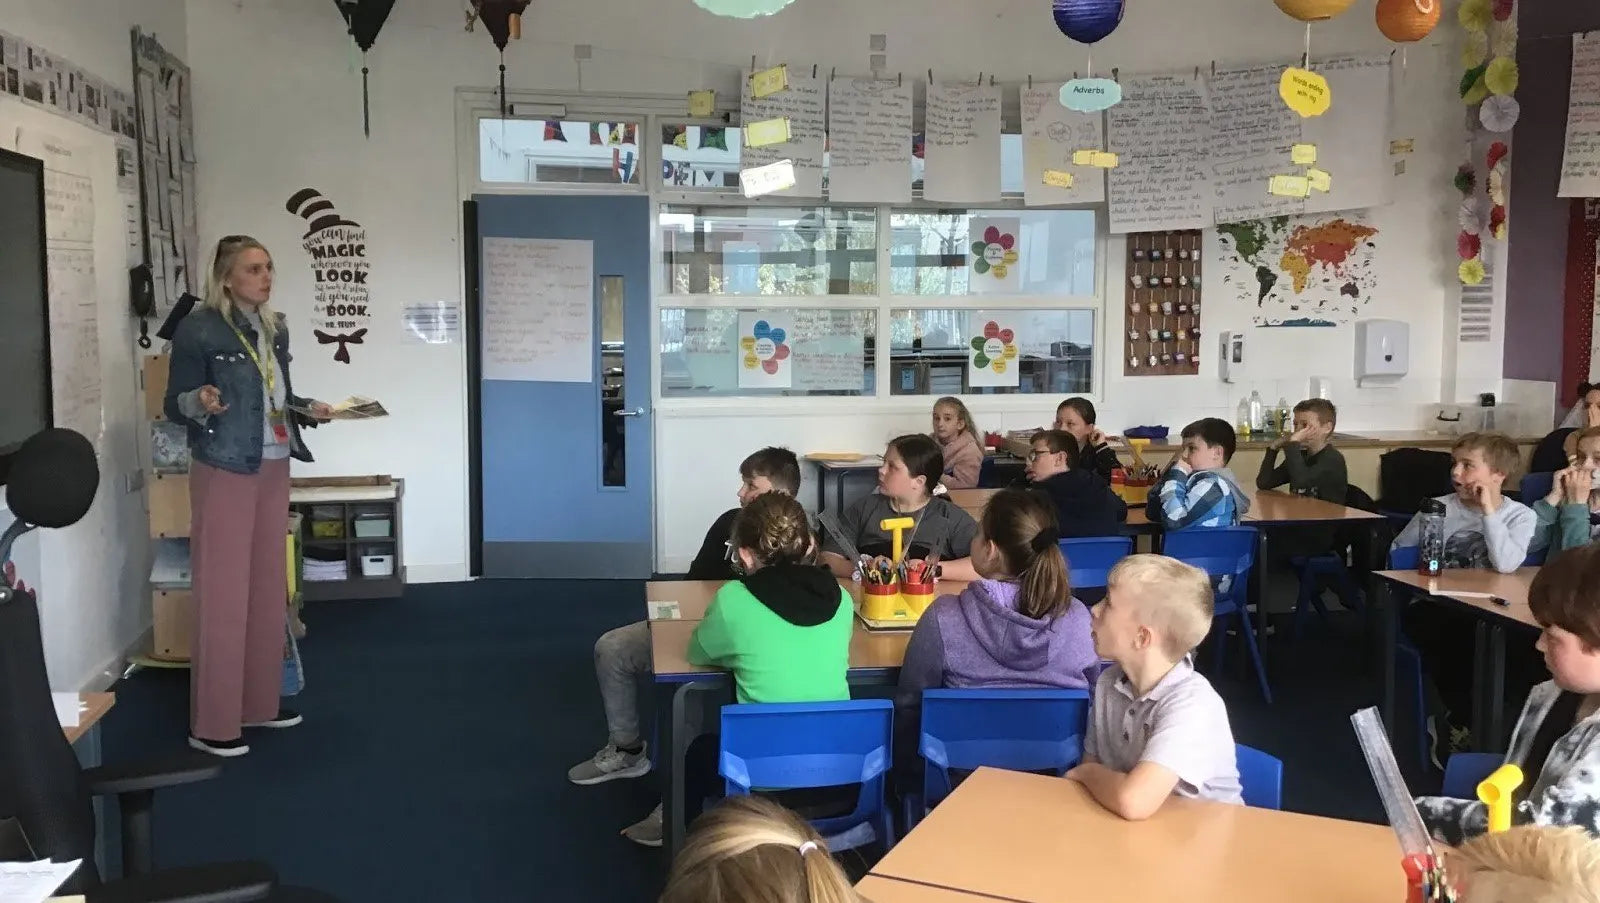 Faye, our co-founder educating St Martin's C of E school children in a classroom